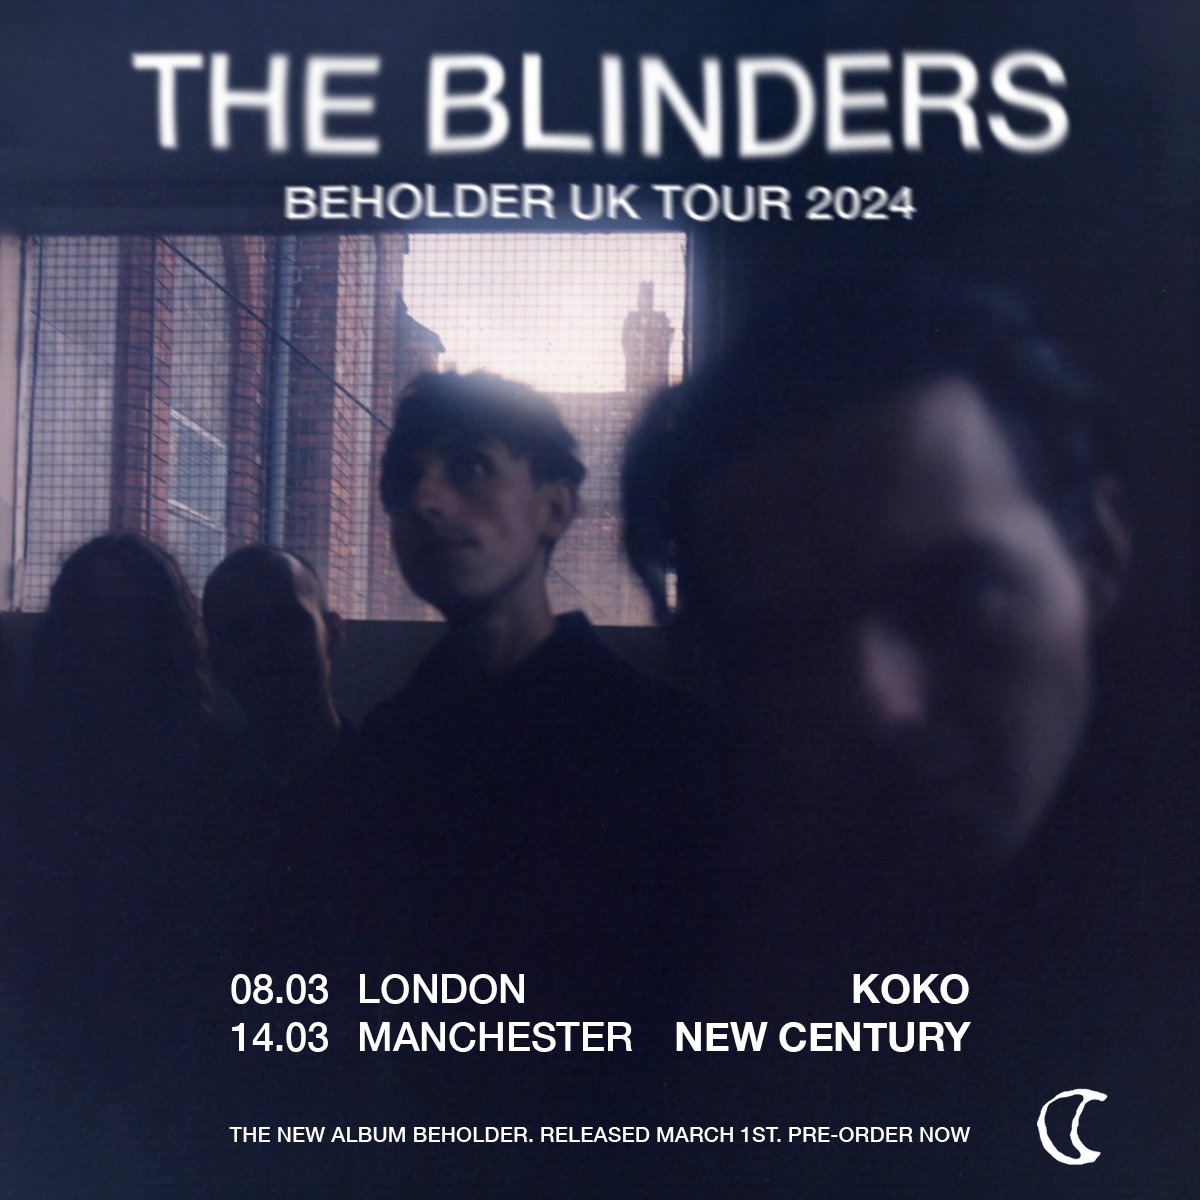 Experience the raw energy of @theblinders at #KOKO on March 8th! With an intense live show and championed by @BBC6Music and @BBCR1, it's a night you won't want to miss. Tickets available here: news.koko.co.uk/theBlinders #TheBlinders #KOKOlive